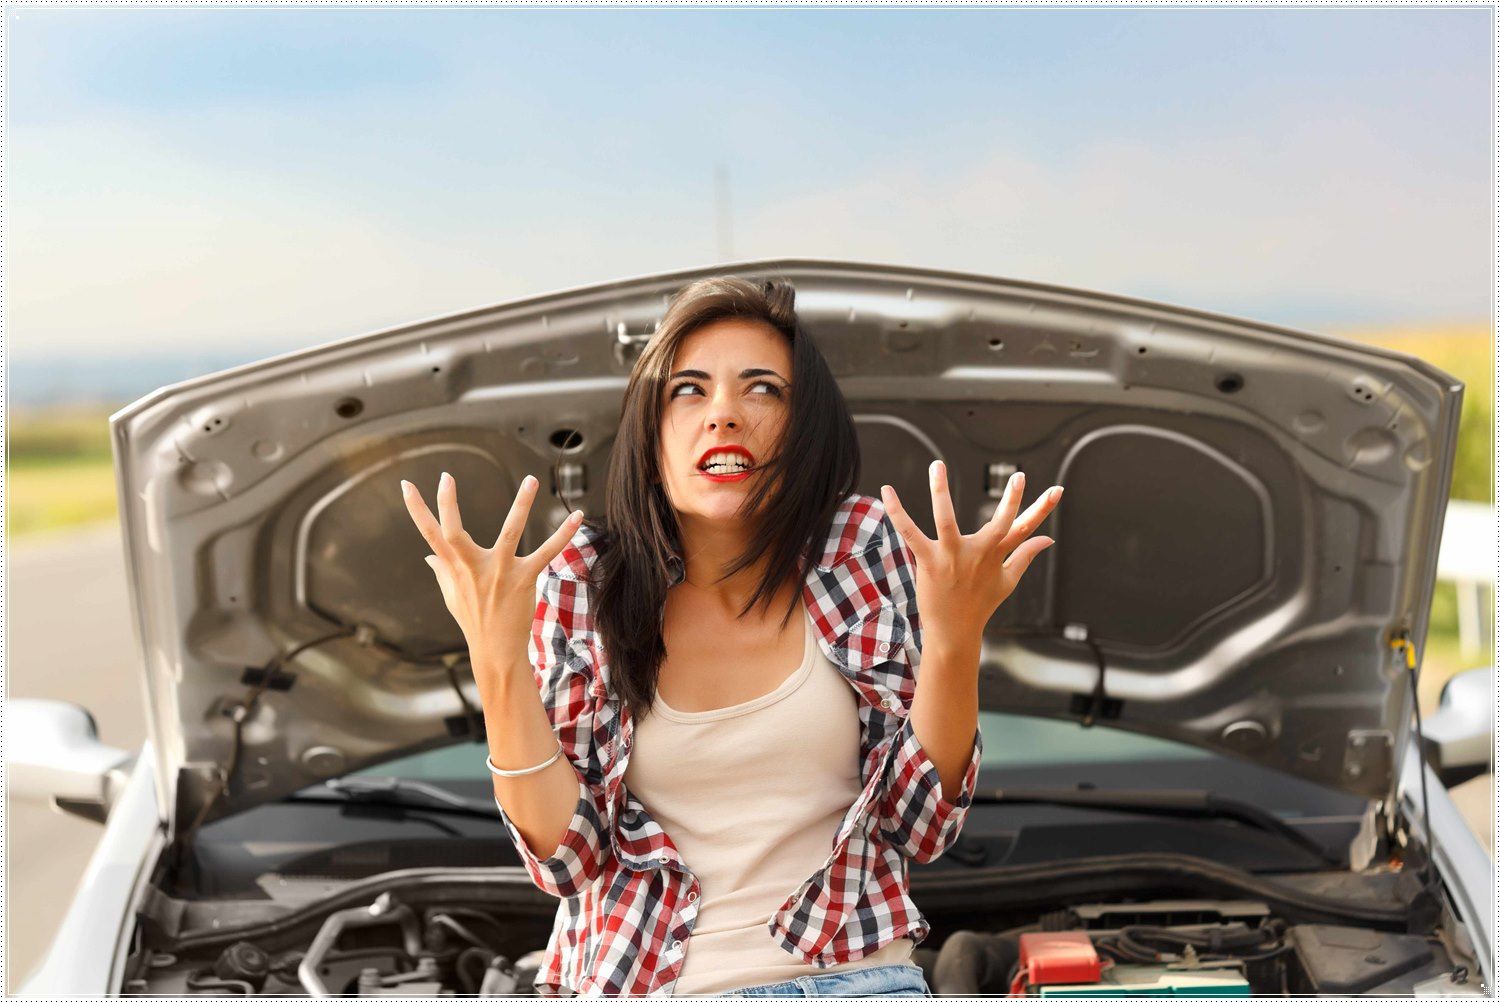 Girls Fixing Their Cars Wallpapers